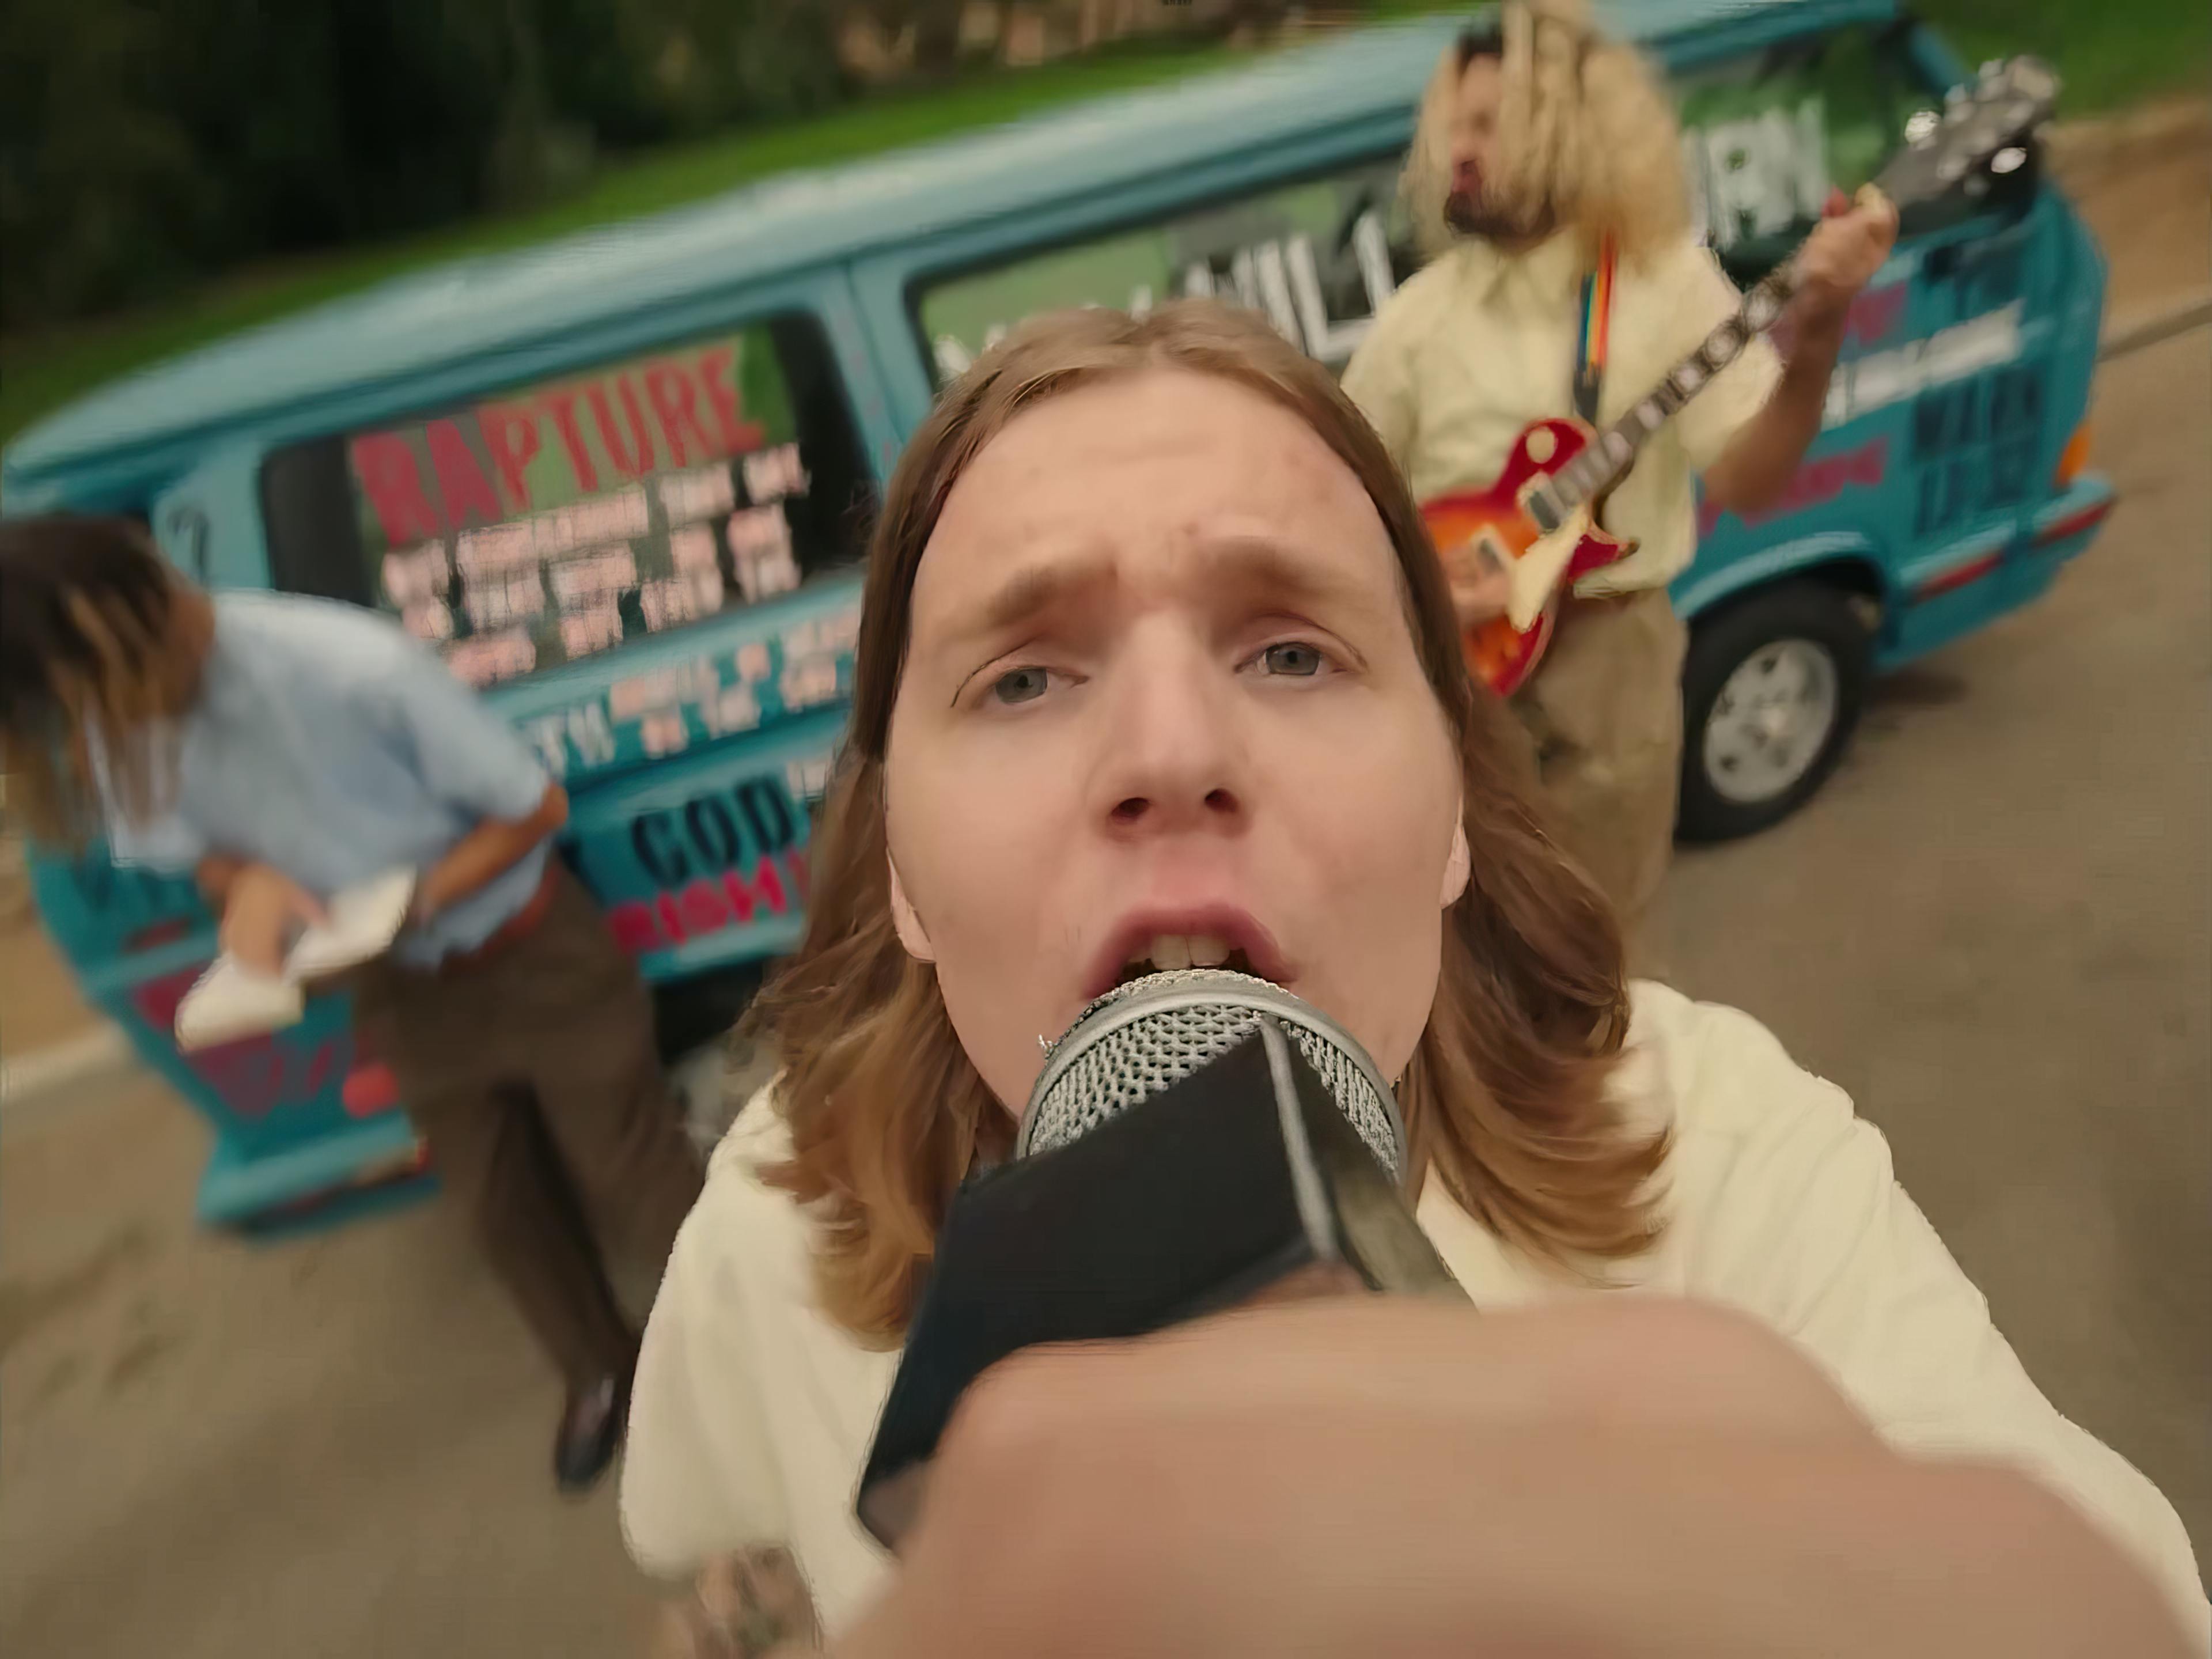 The lead singer of JAWNY with shoulder-length hair sings passionately into a microphone. Behind him, out of focus, are band members and a van detailed with vibrant text and graphics suggesting a dynamic music event. The setting seems informal and energetic, typical of a music video setting.